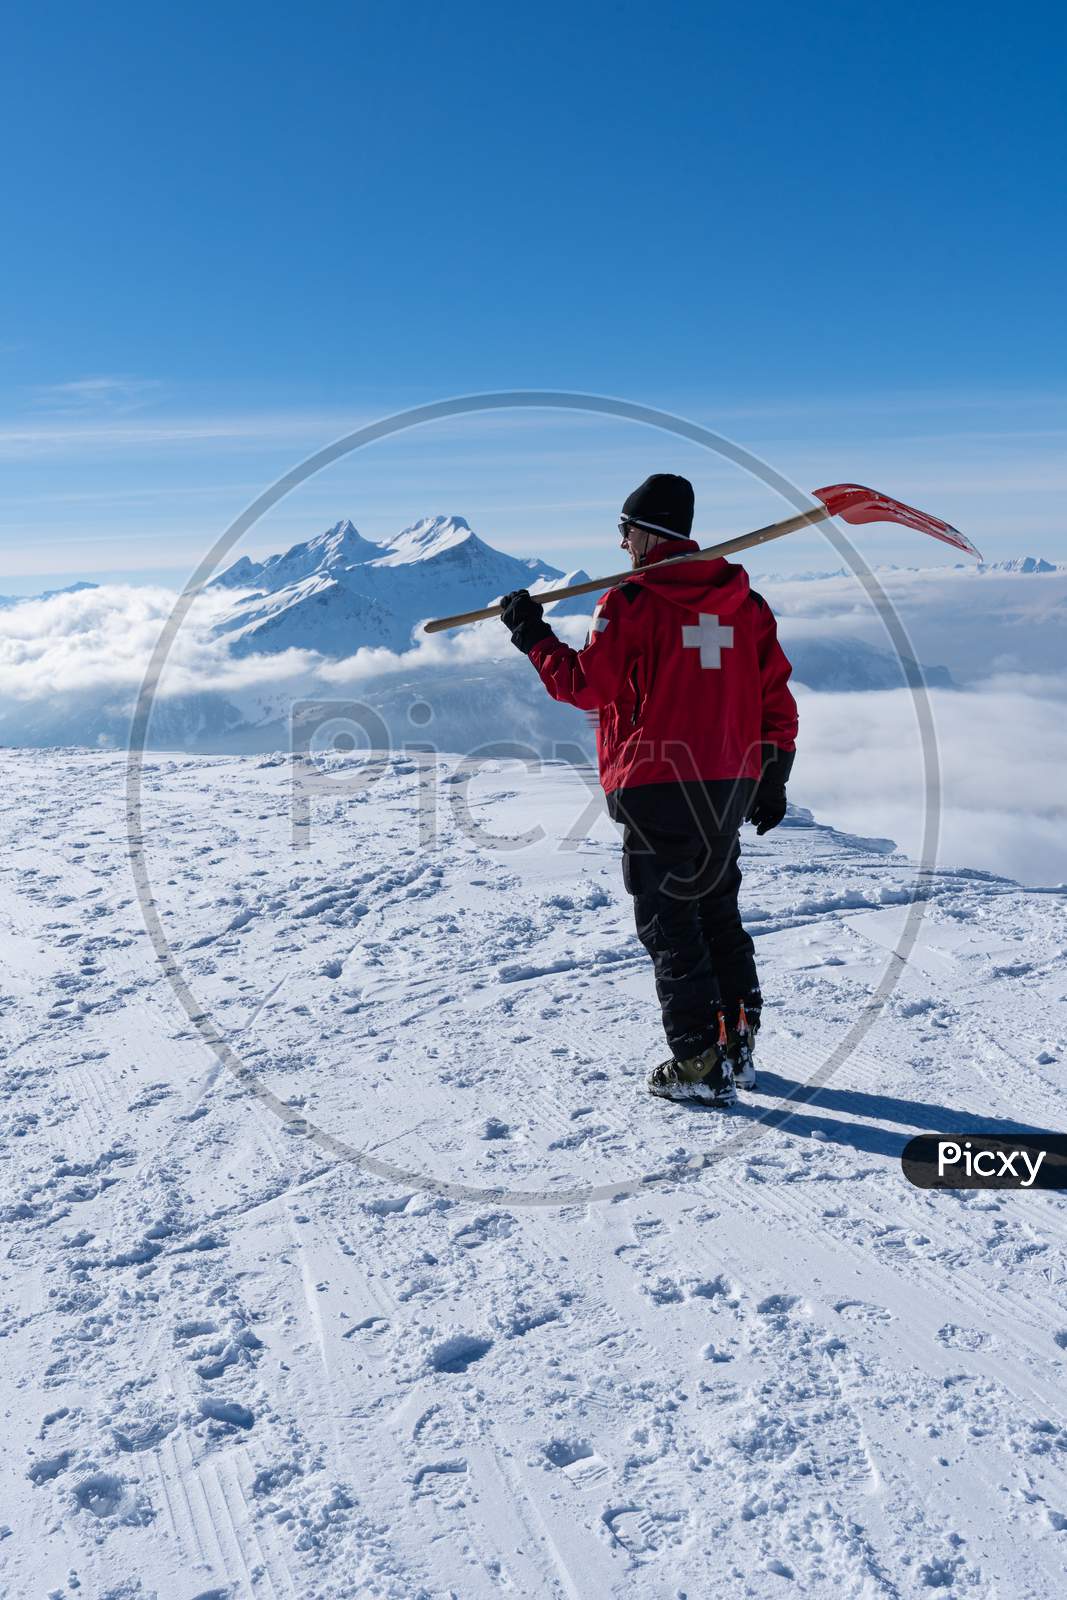 Ski patroller On Snow Caped Mountain Is Walking Against Sun With A Red Rescue Jacket And A Shovel On His Shoulders.